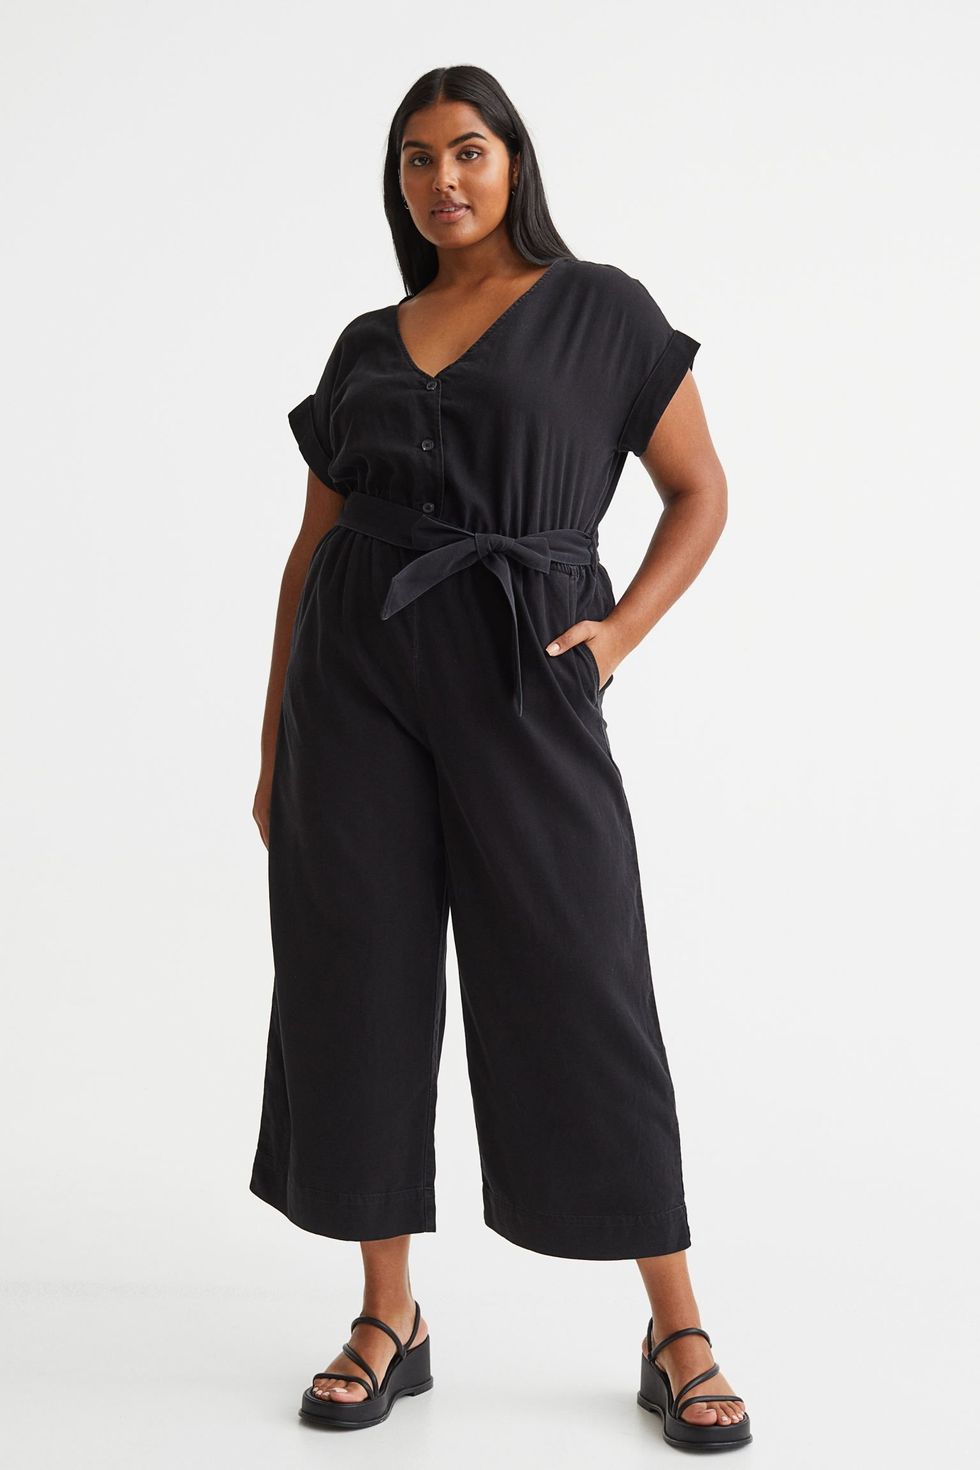 Kiyonna Plus-Size Jumpsuits & Rompers